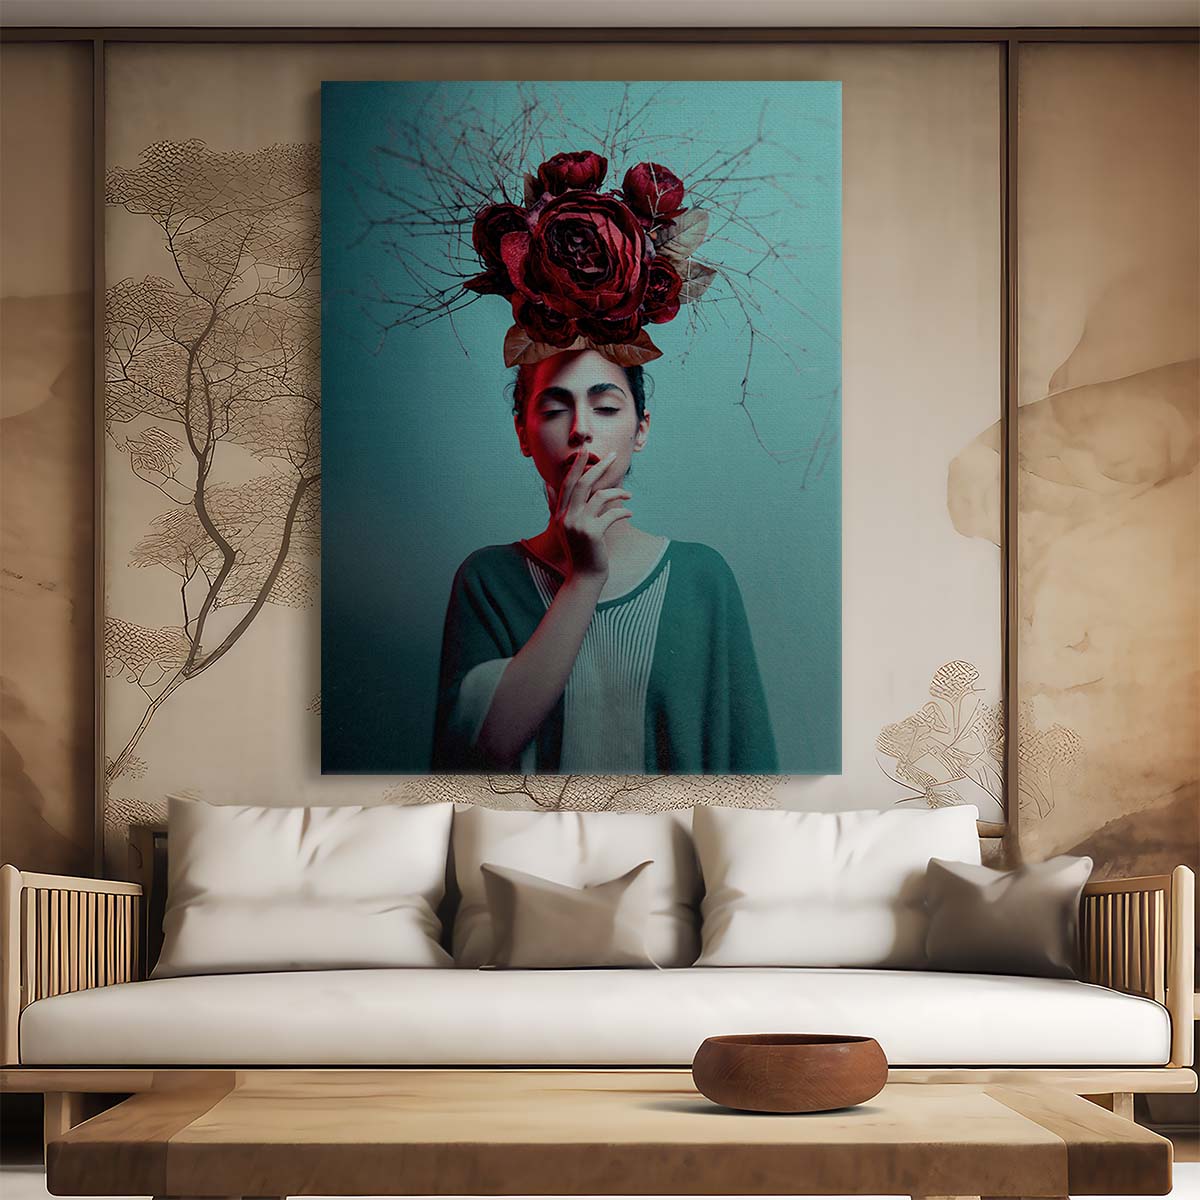 Romantic Floral Woman Portrait - Teal & Red Rose Botanical Photography by Luxuriance Designs, made in USA